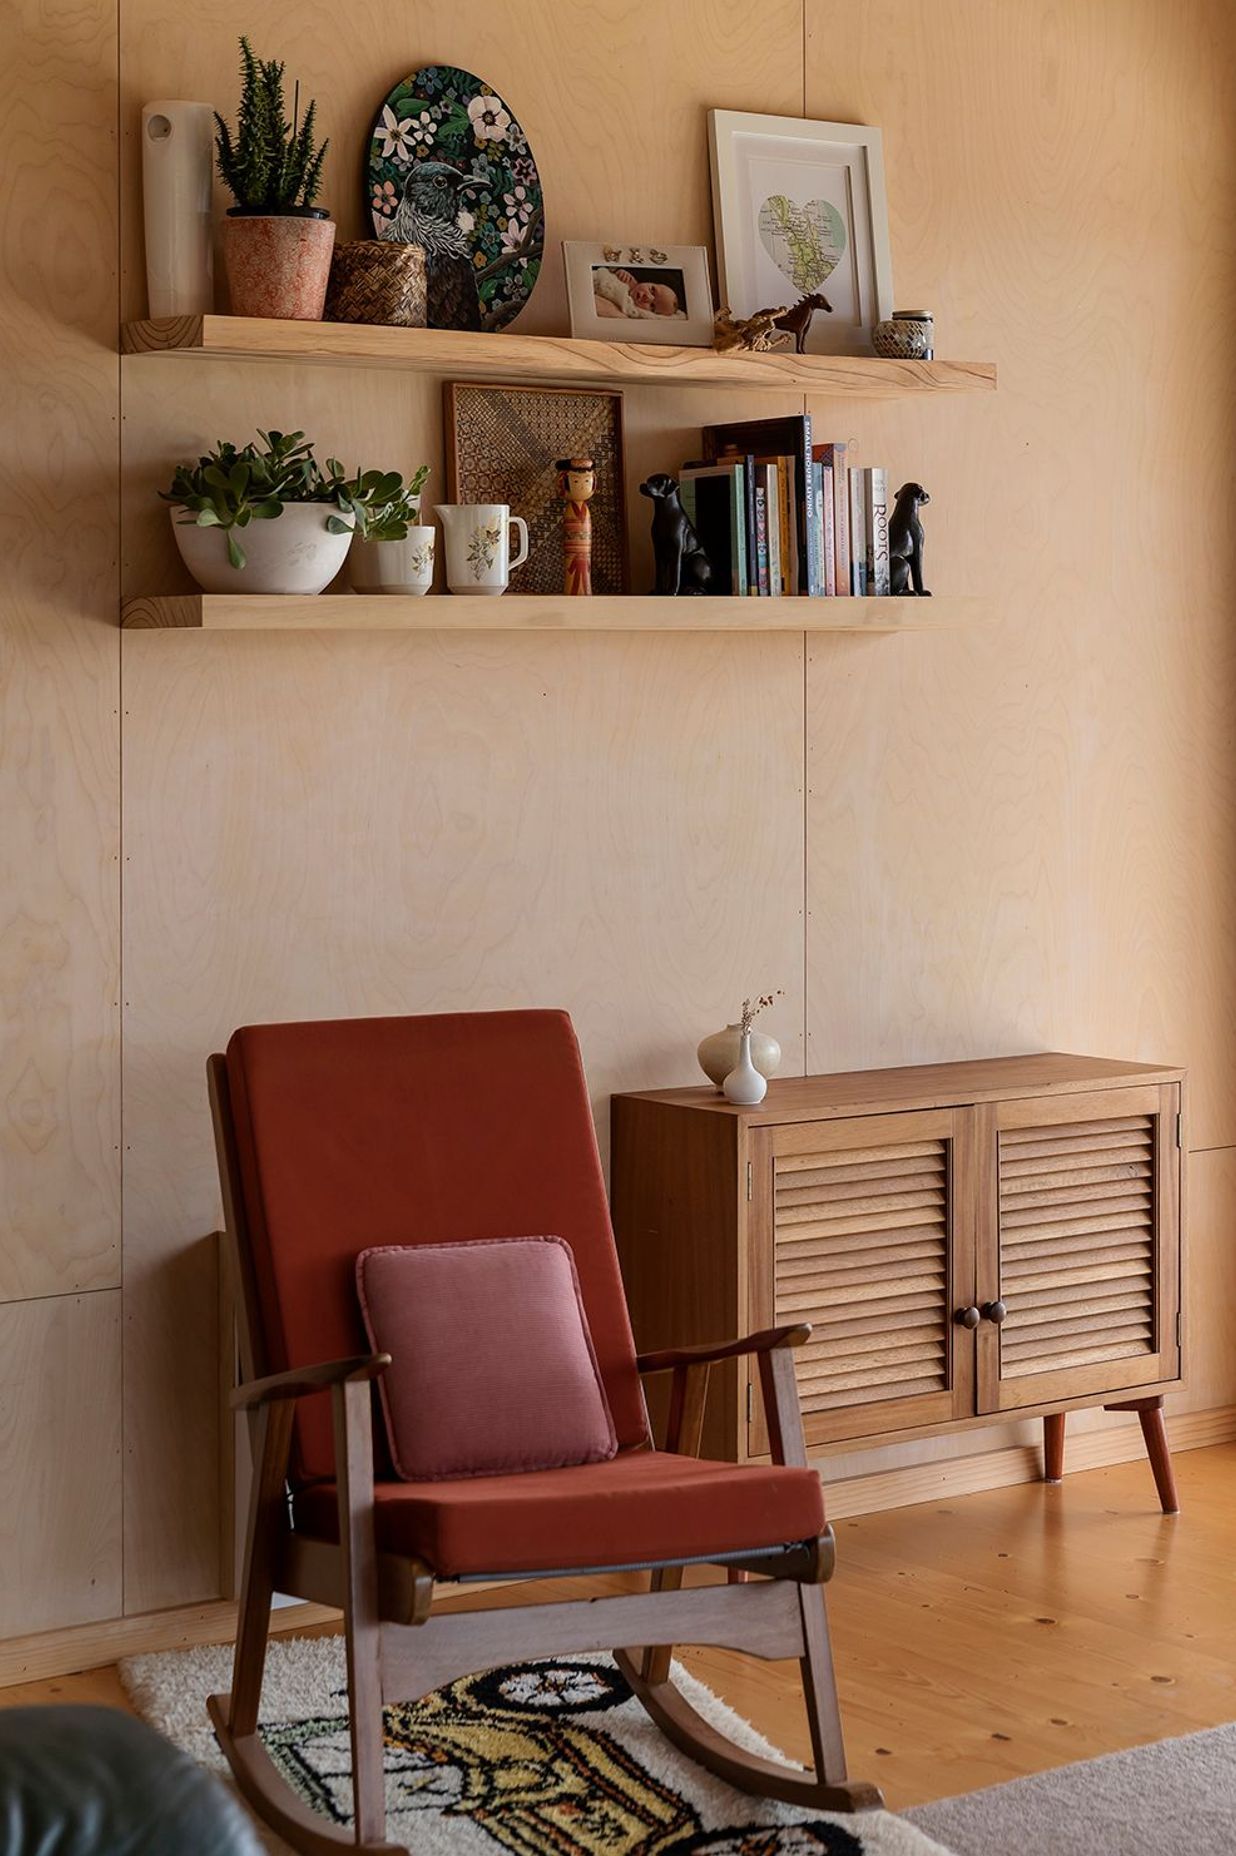 Plywood lines the interior spaces, providing a warm backdrop for vintage furntiture.